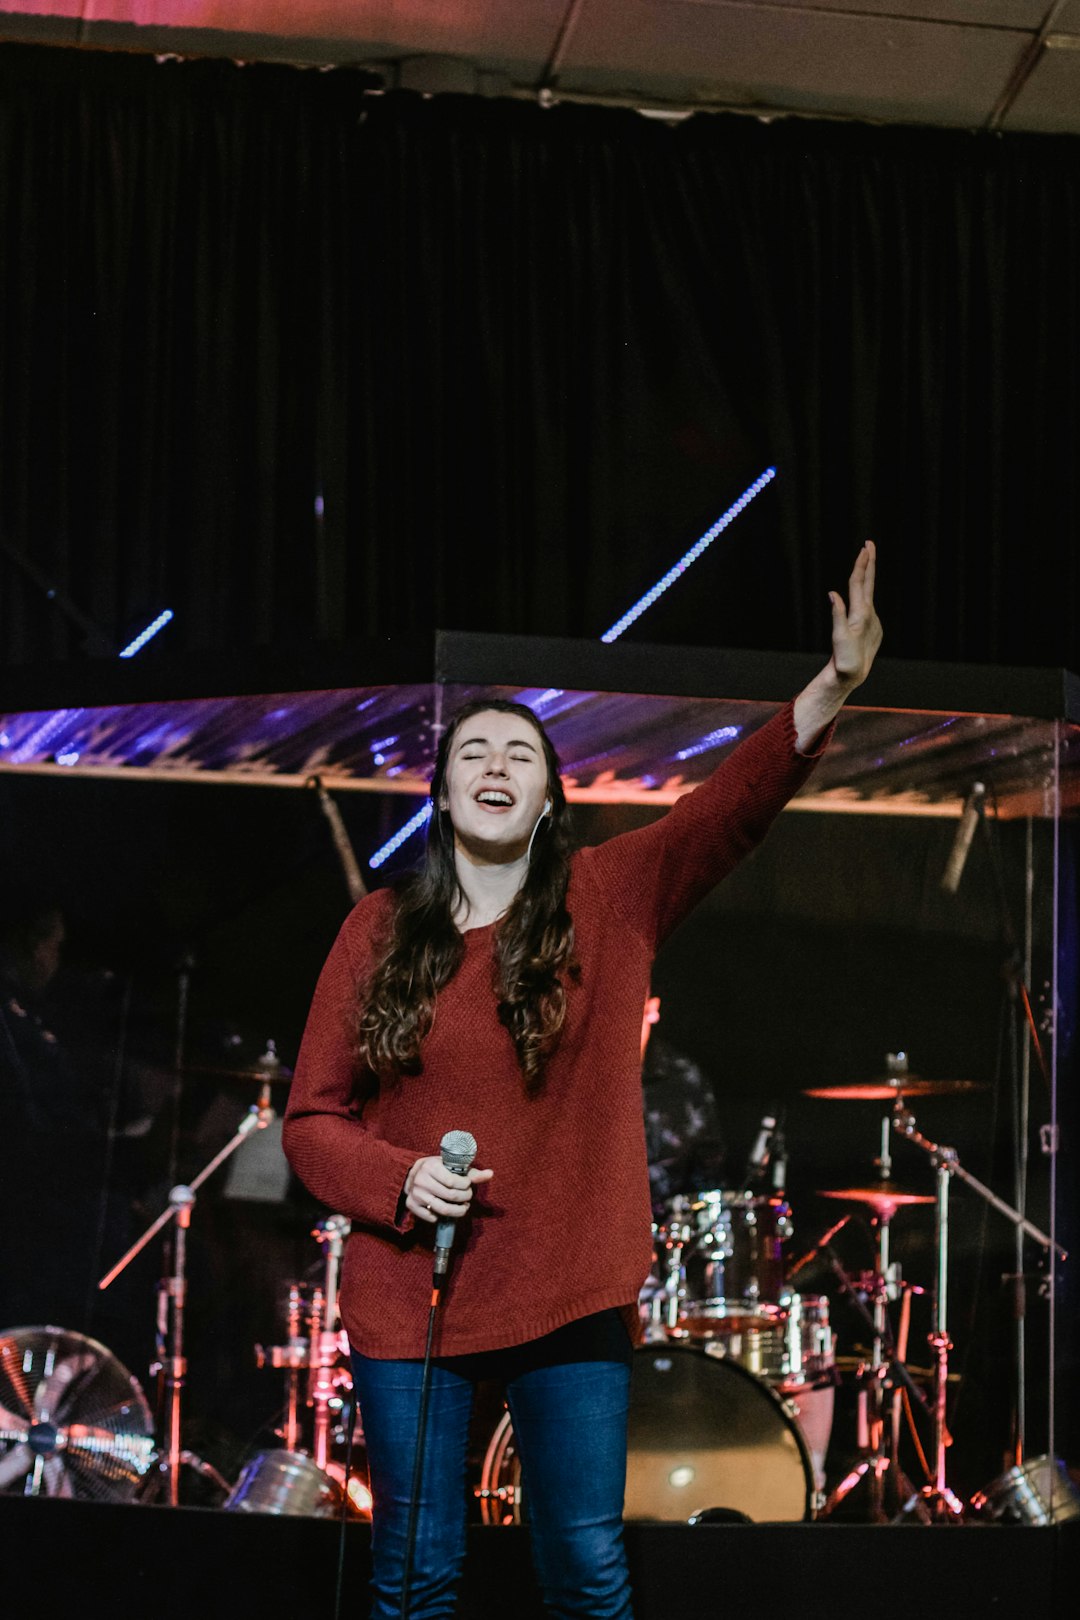 woman wearing red long-sleeved shirt holding gray microphone performing on stage